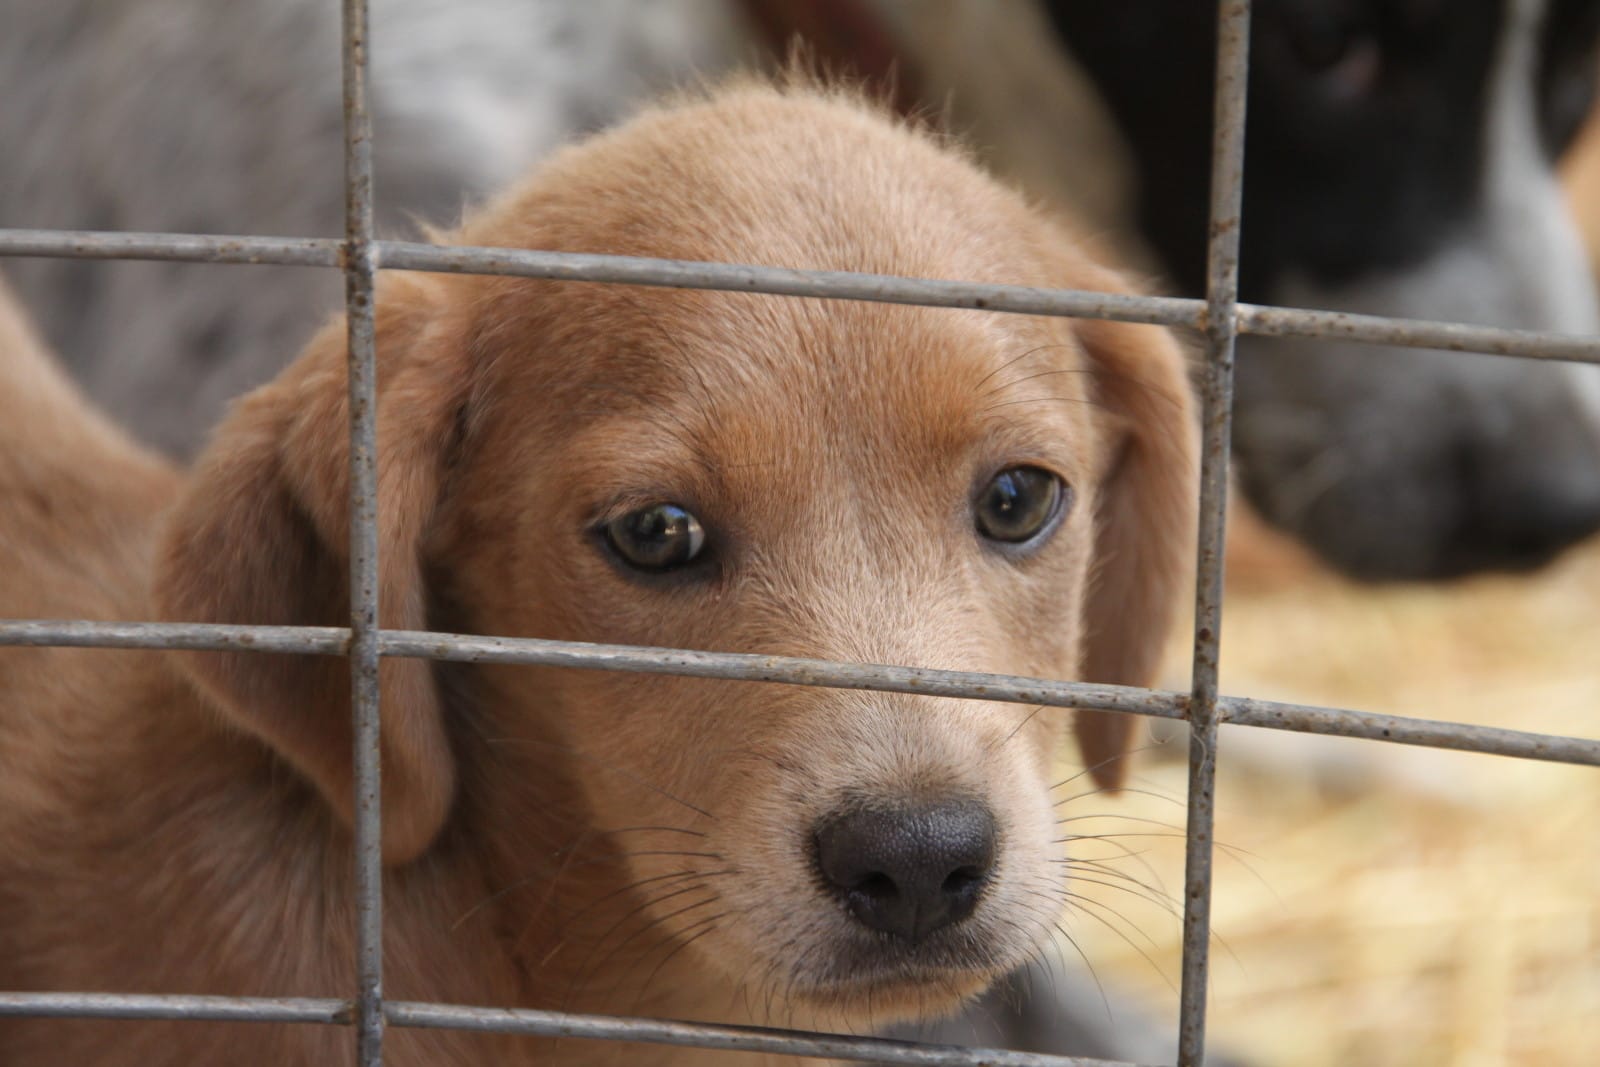 10 Ways to Help End Pet Homelessness